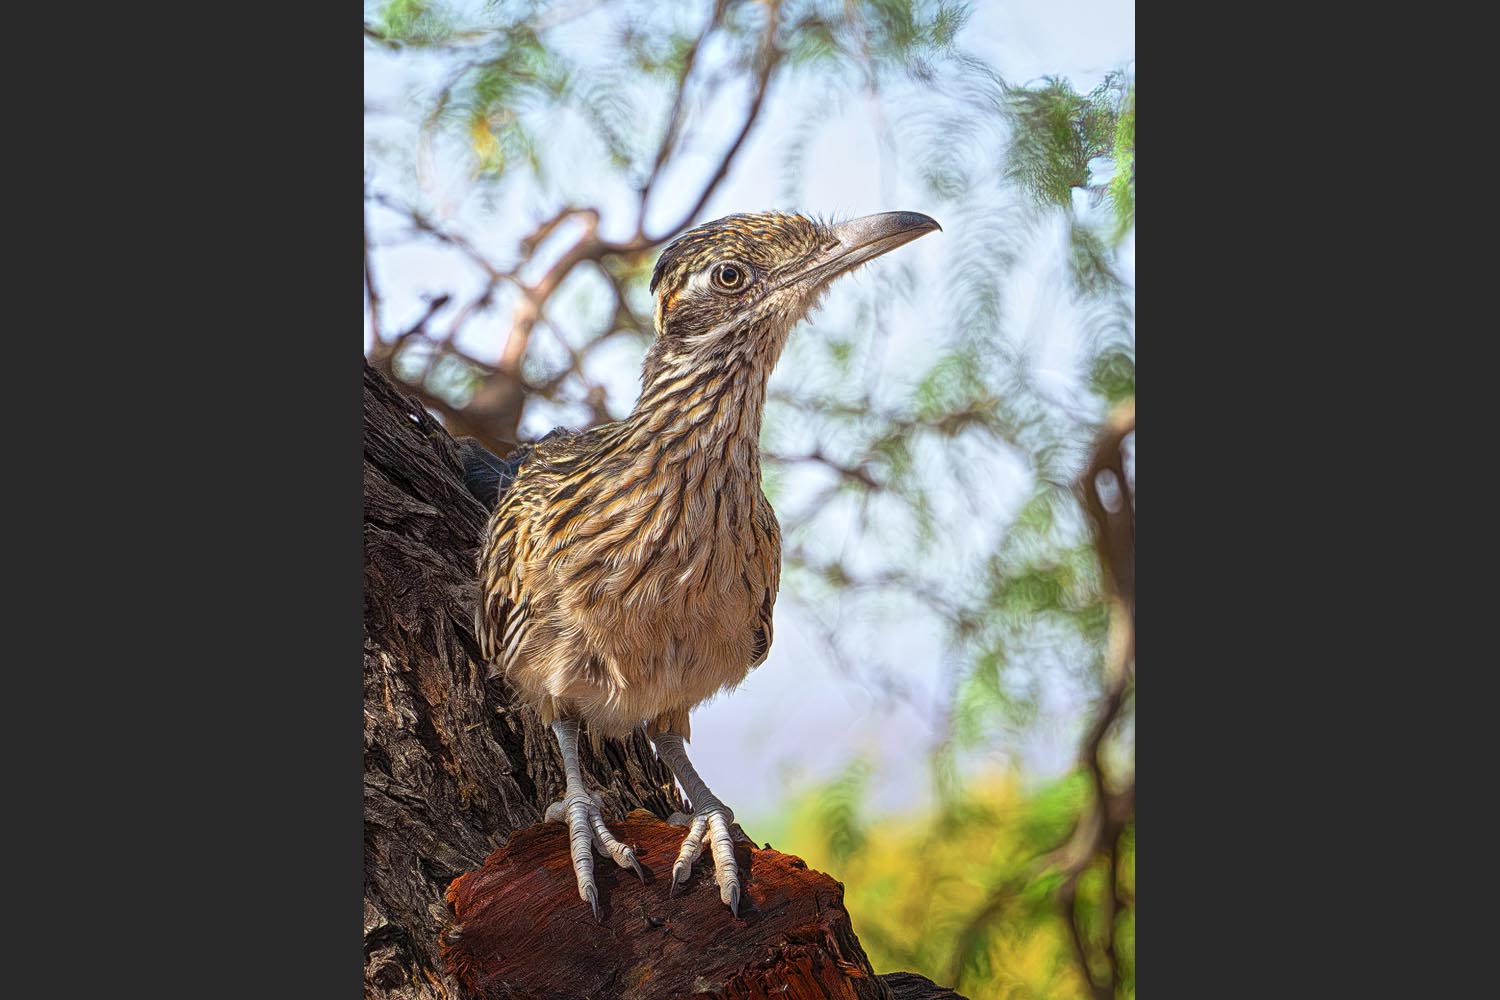 Carl Maier: Roadrunner - Las Cruces, New Mexico